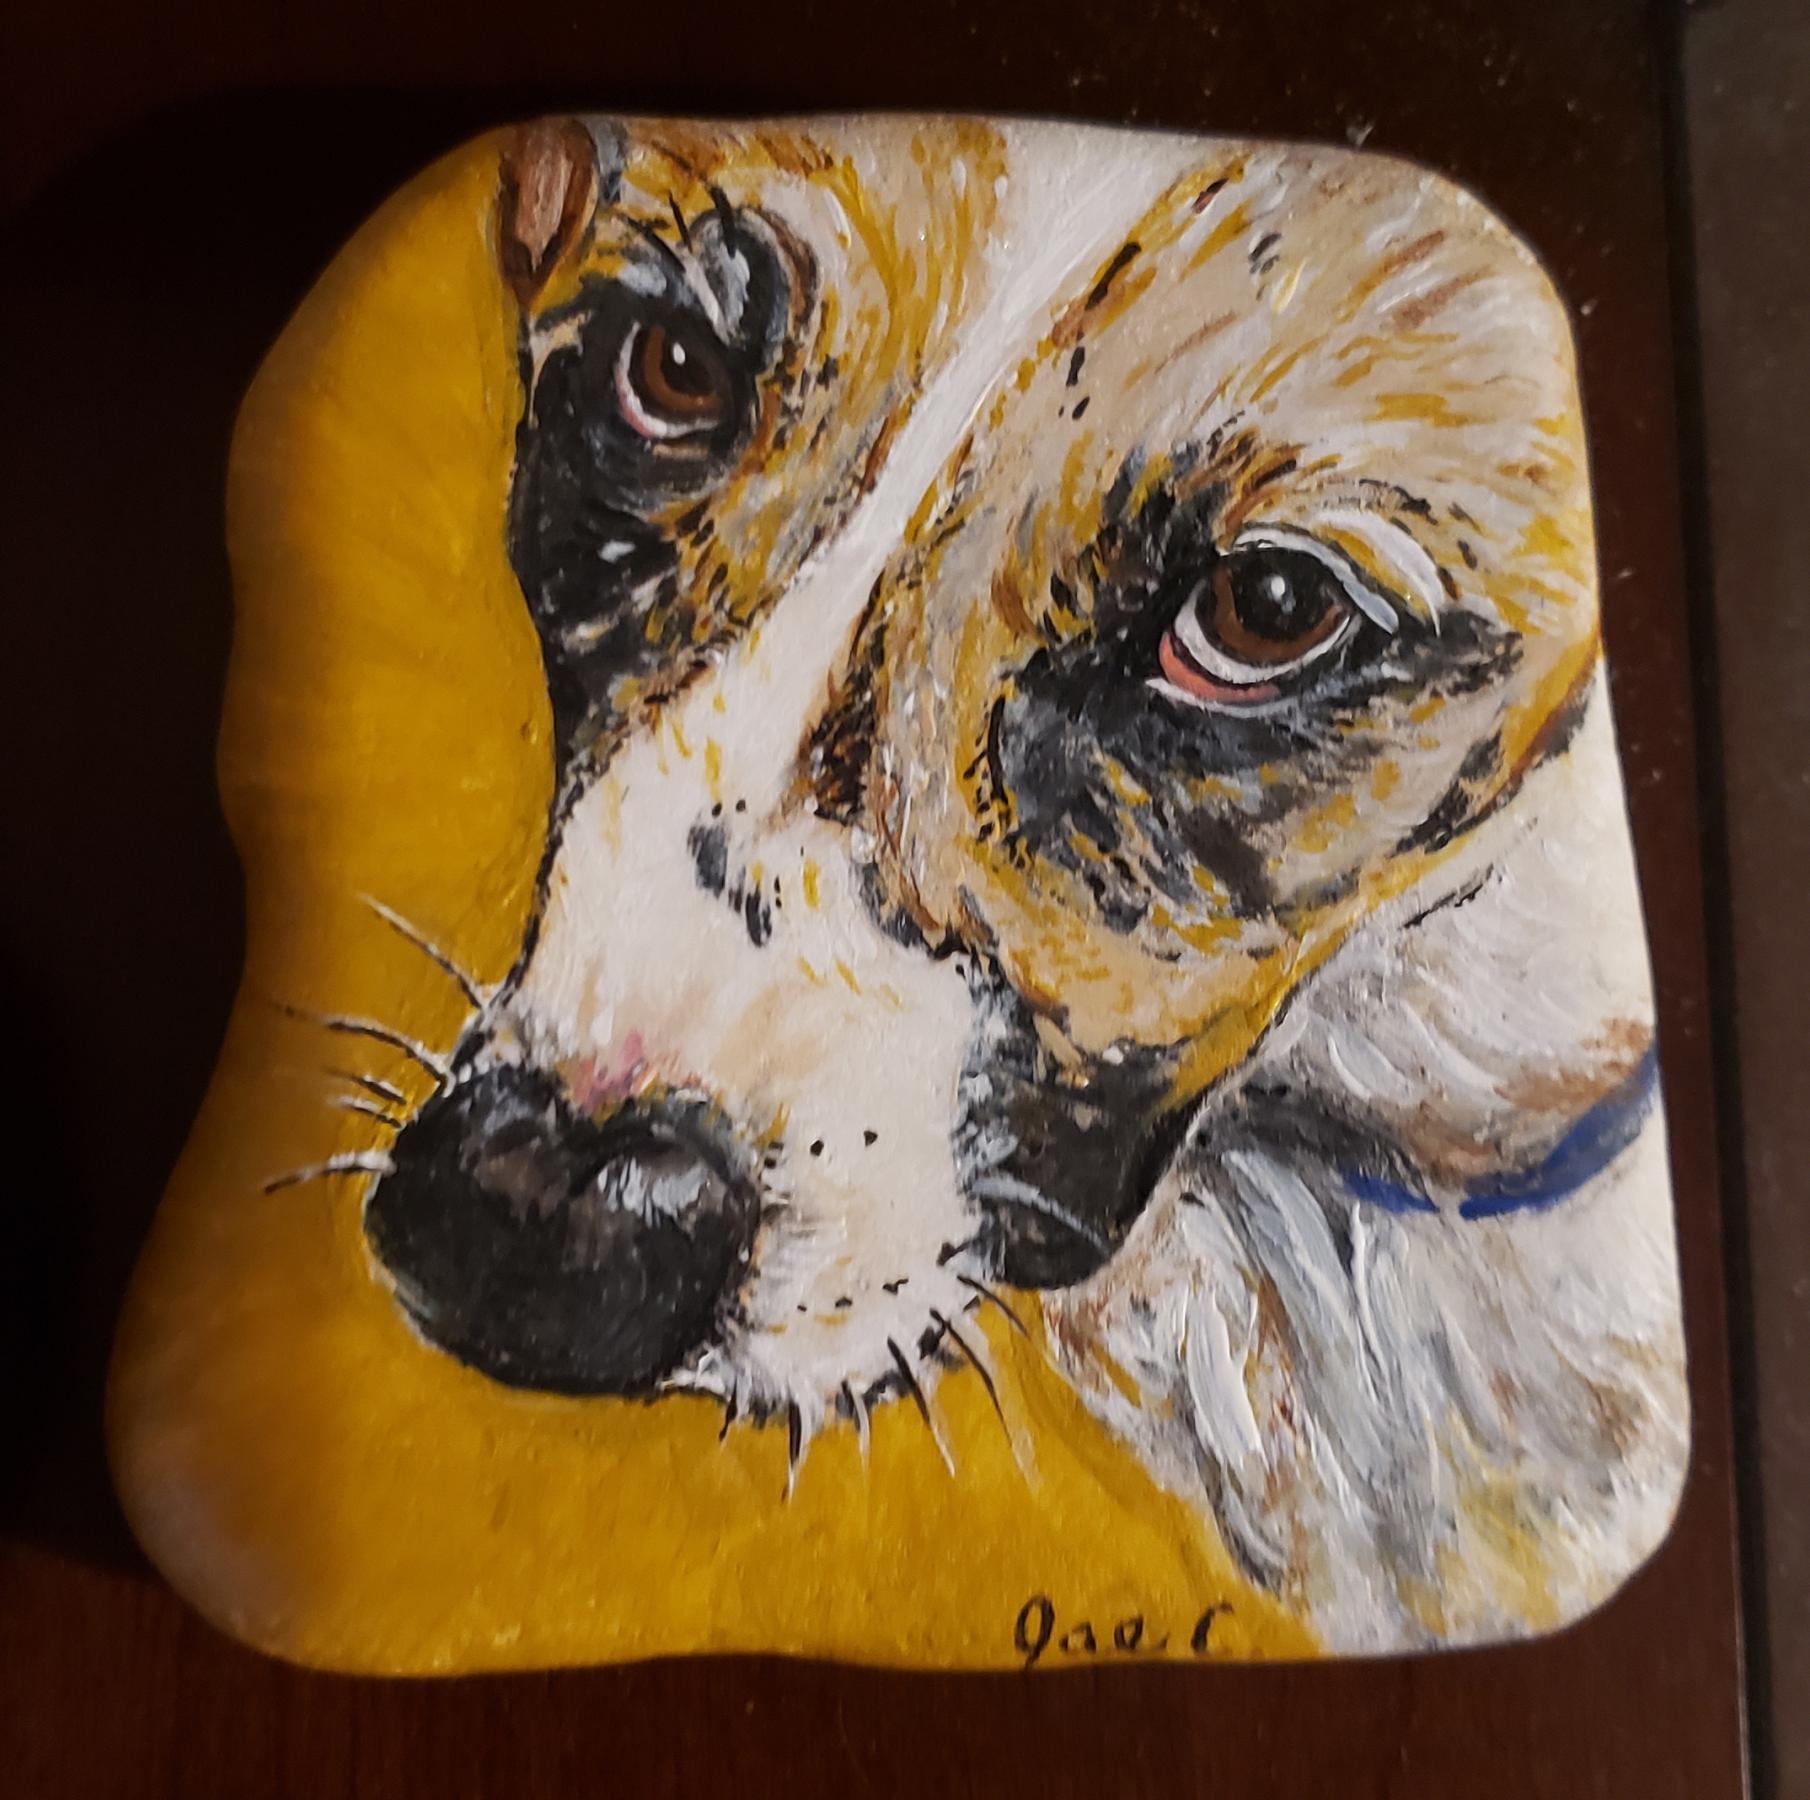 Closeup of Dog painted on rock, focusing on eyes.